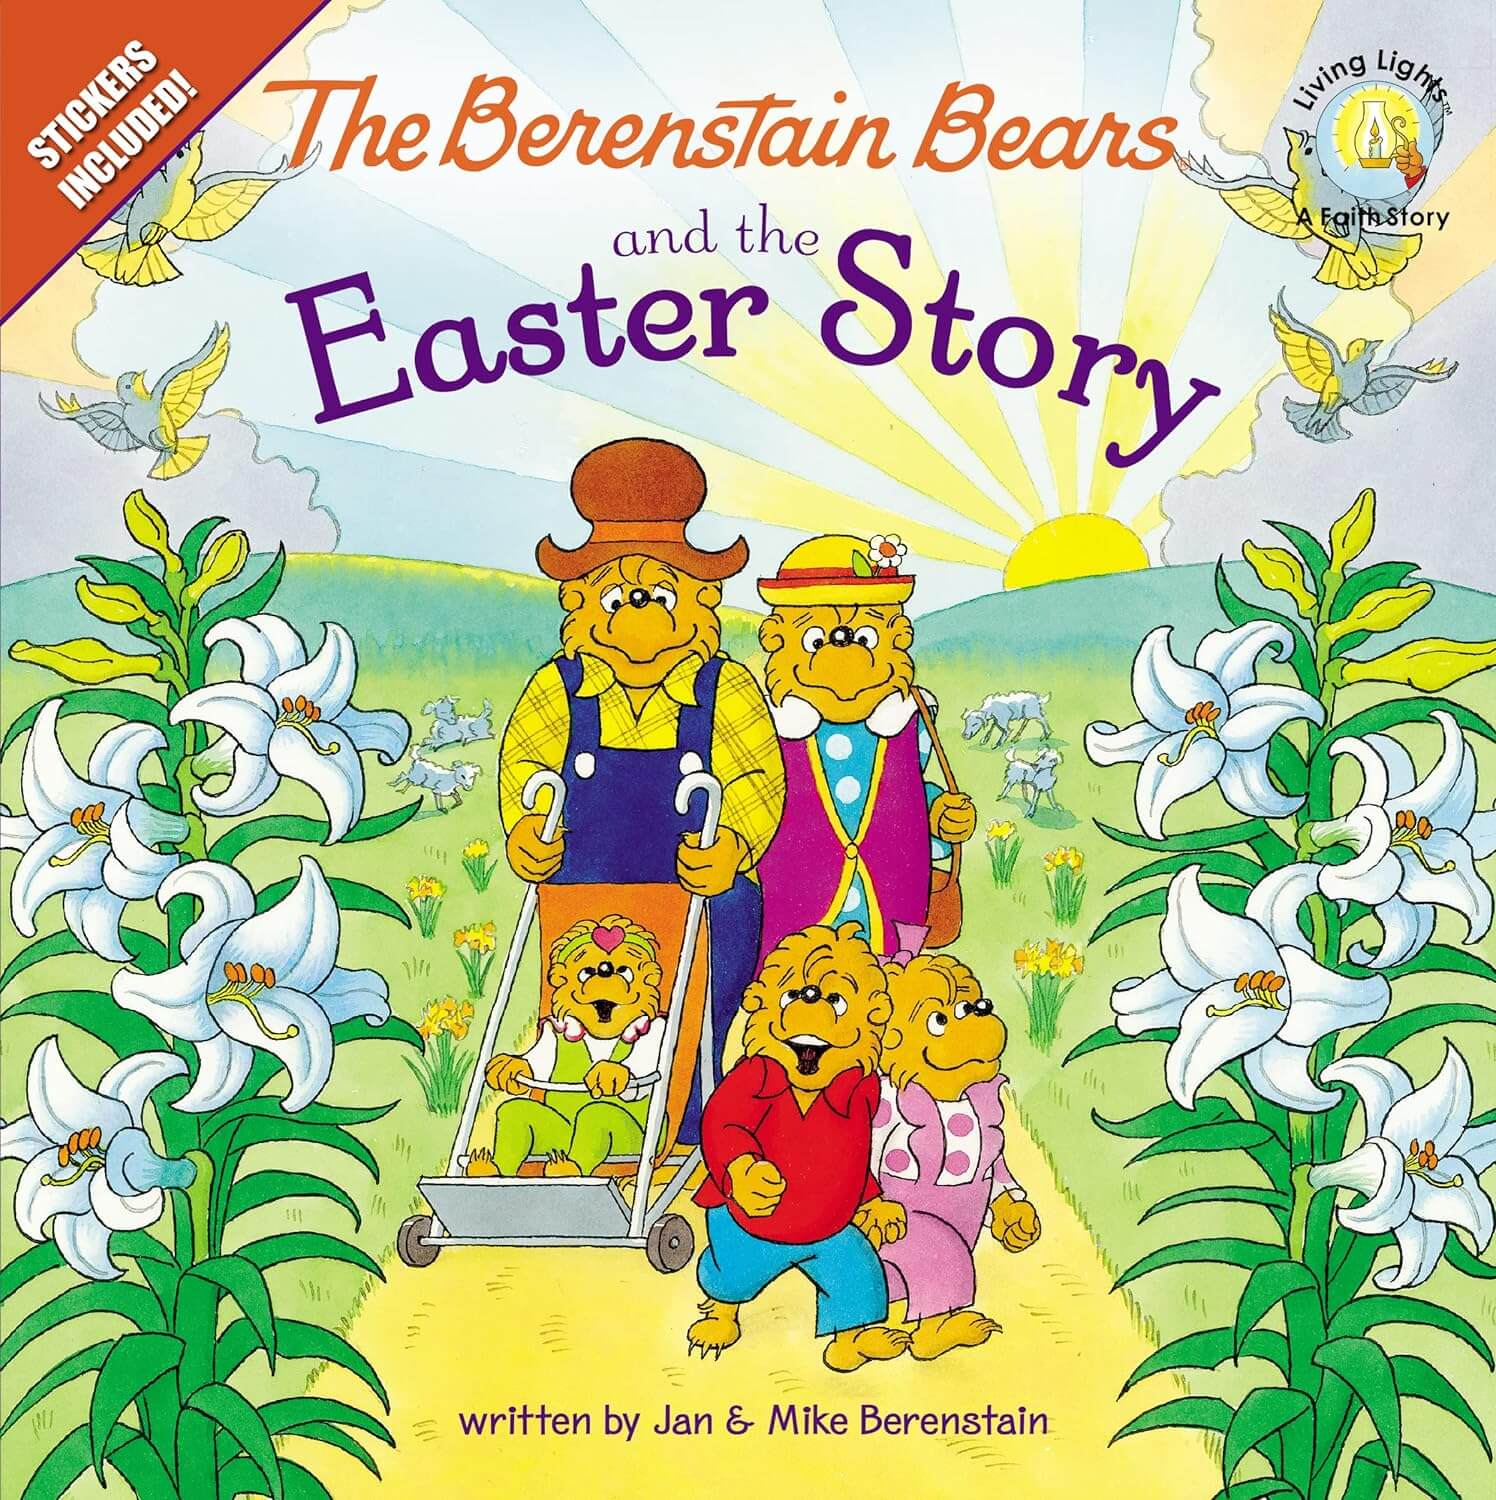 Berenstain bear family walking on yellow road for easter